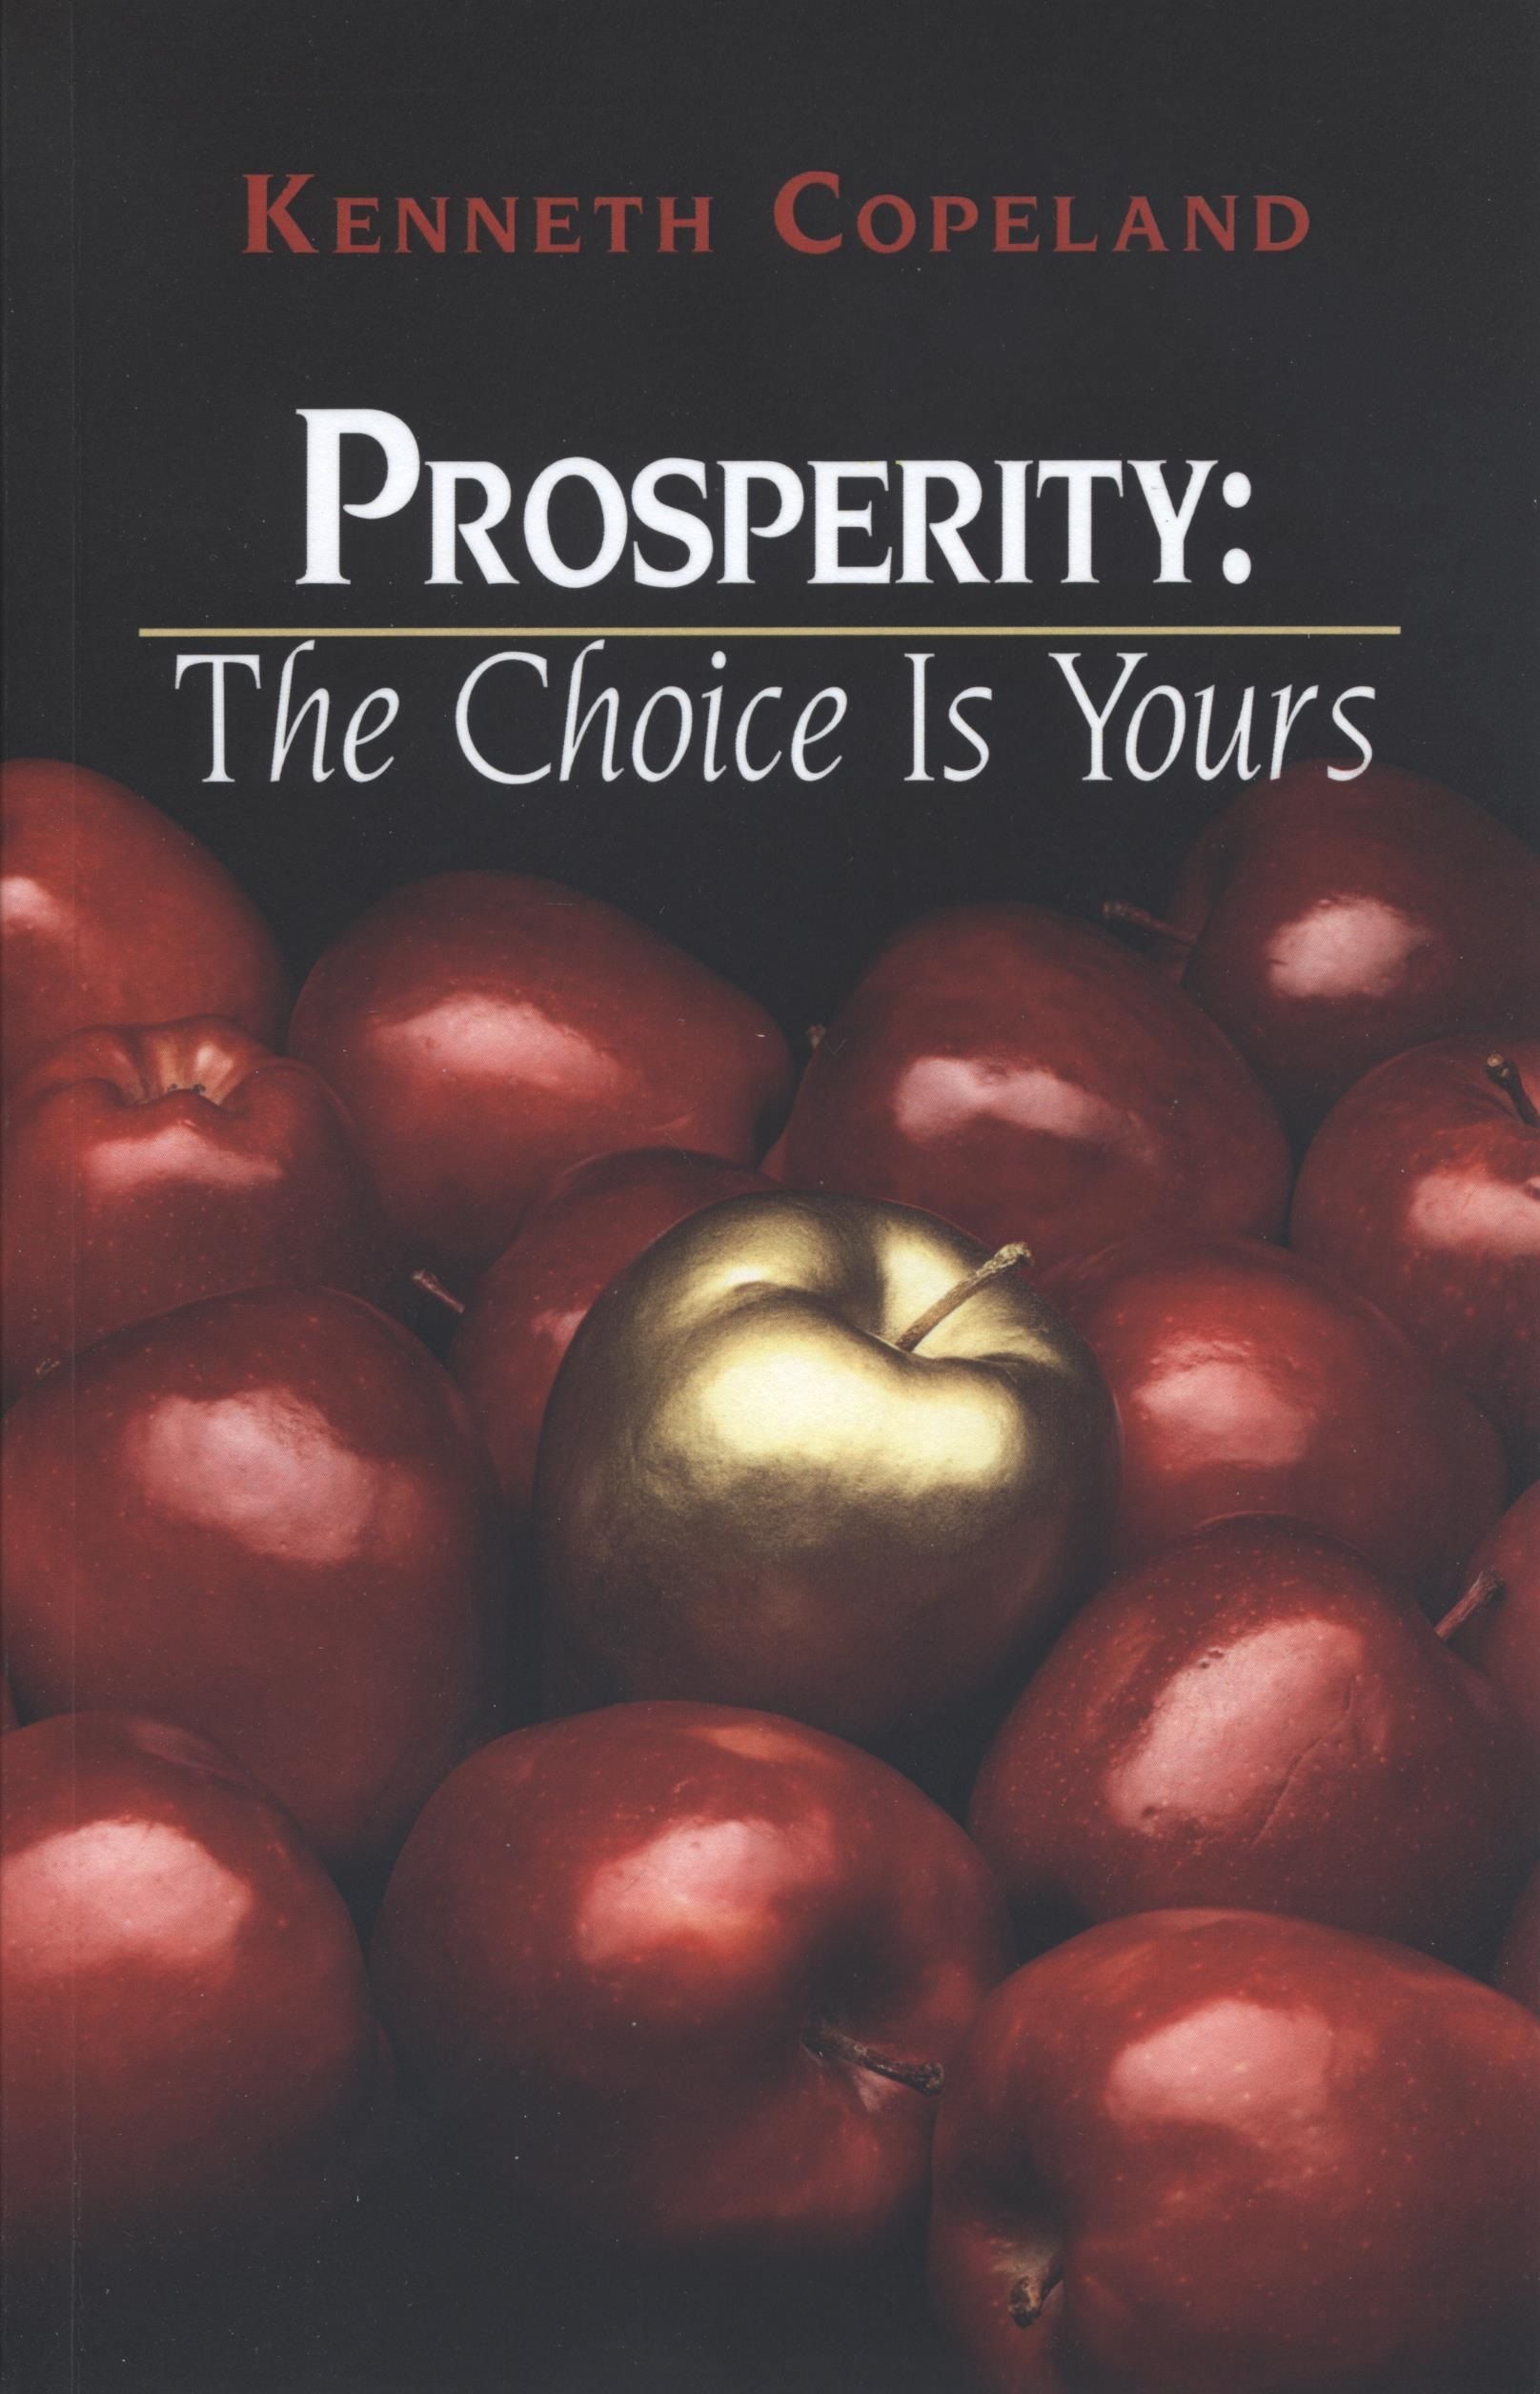 Kenneth Copeland: Prosperity - The Coice Is Yours